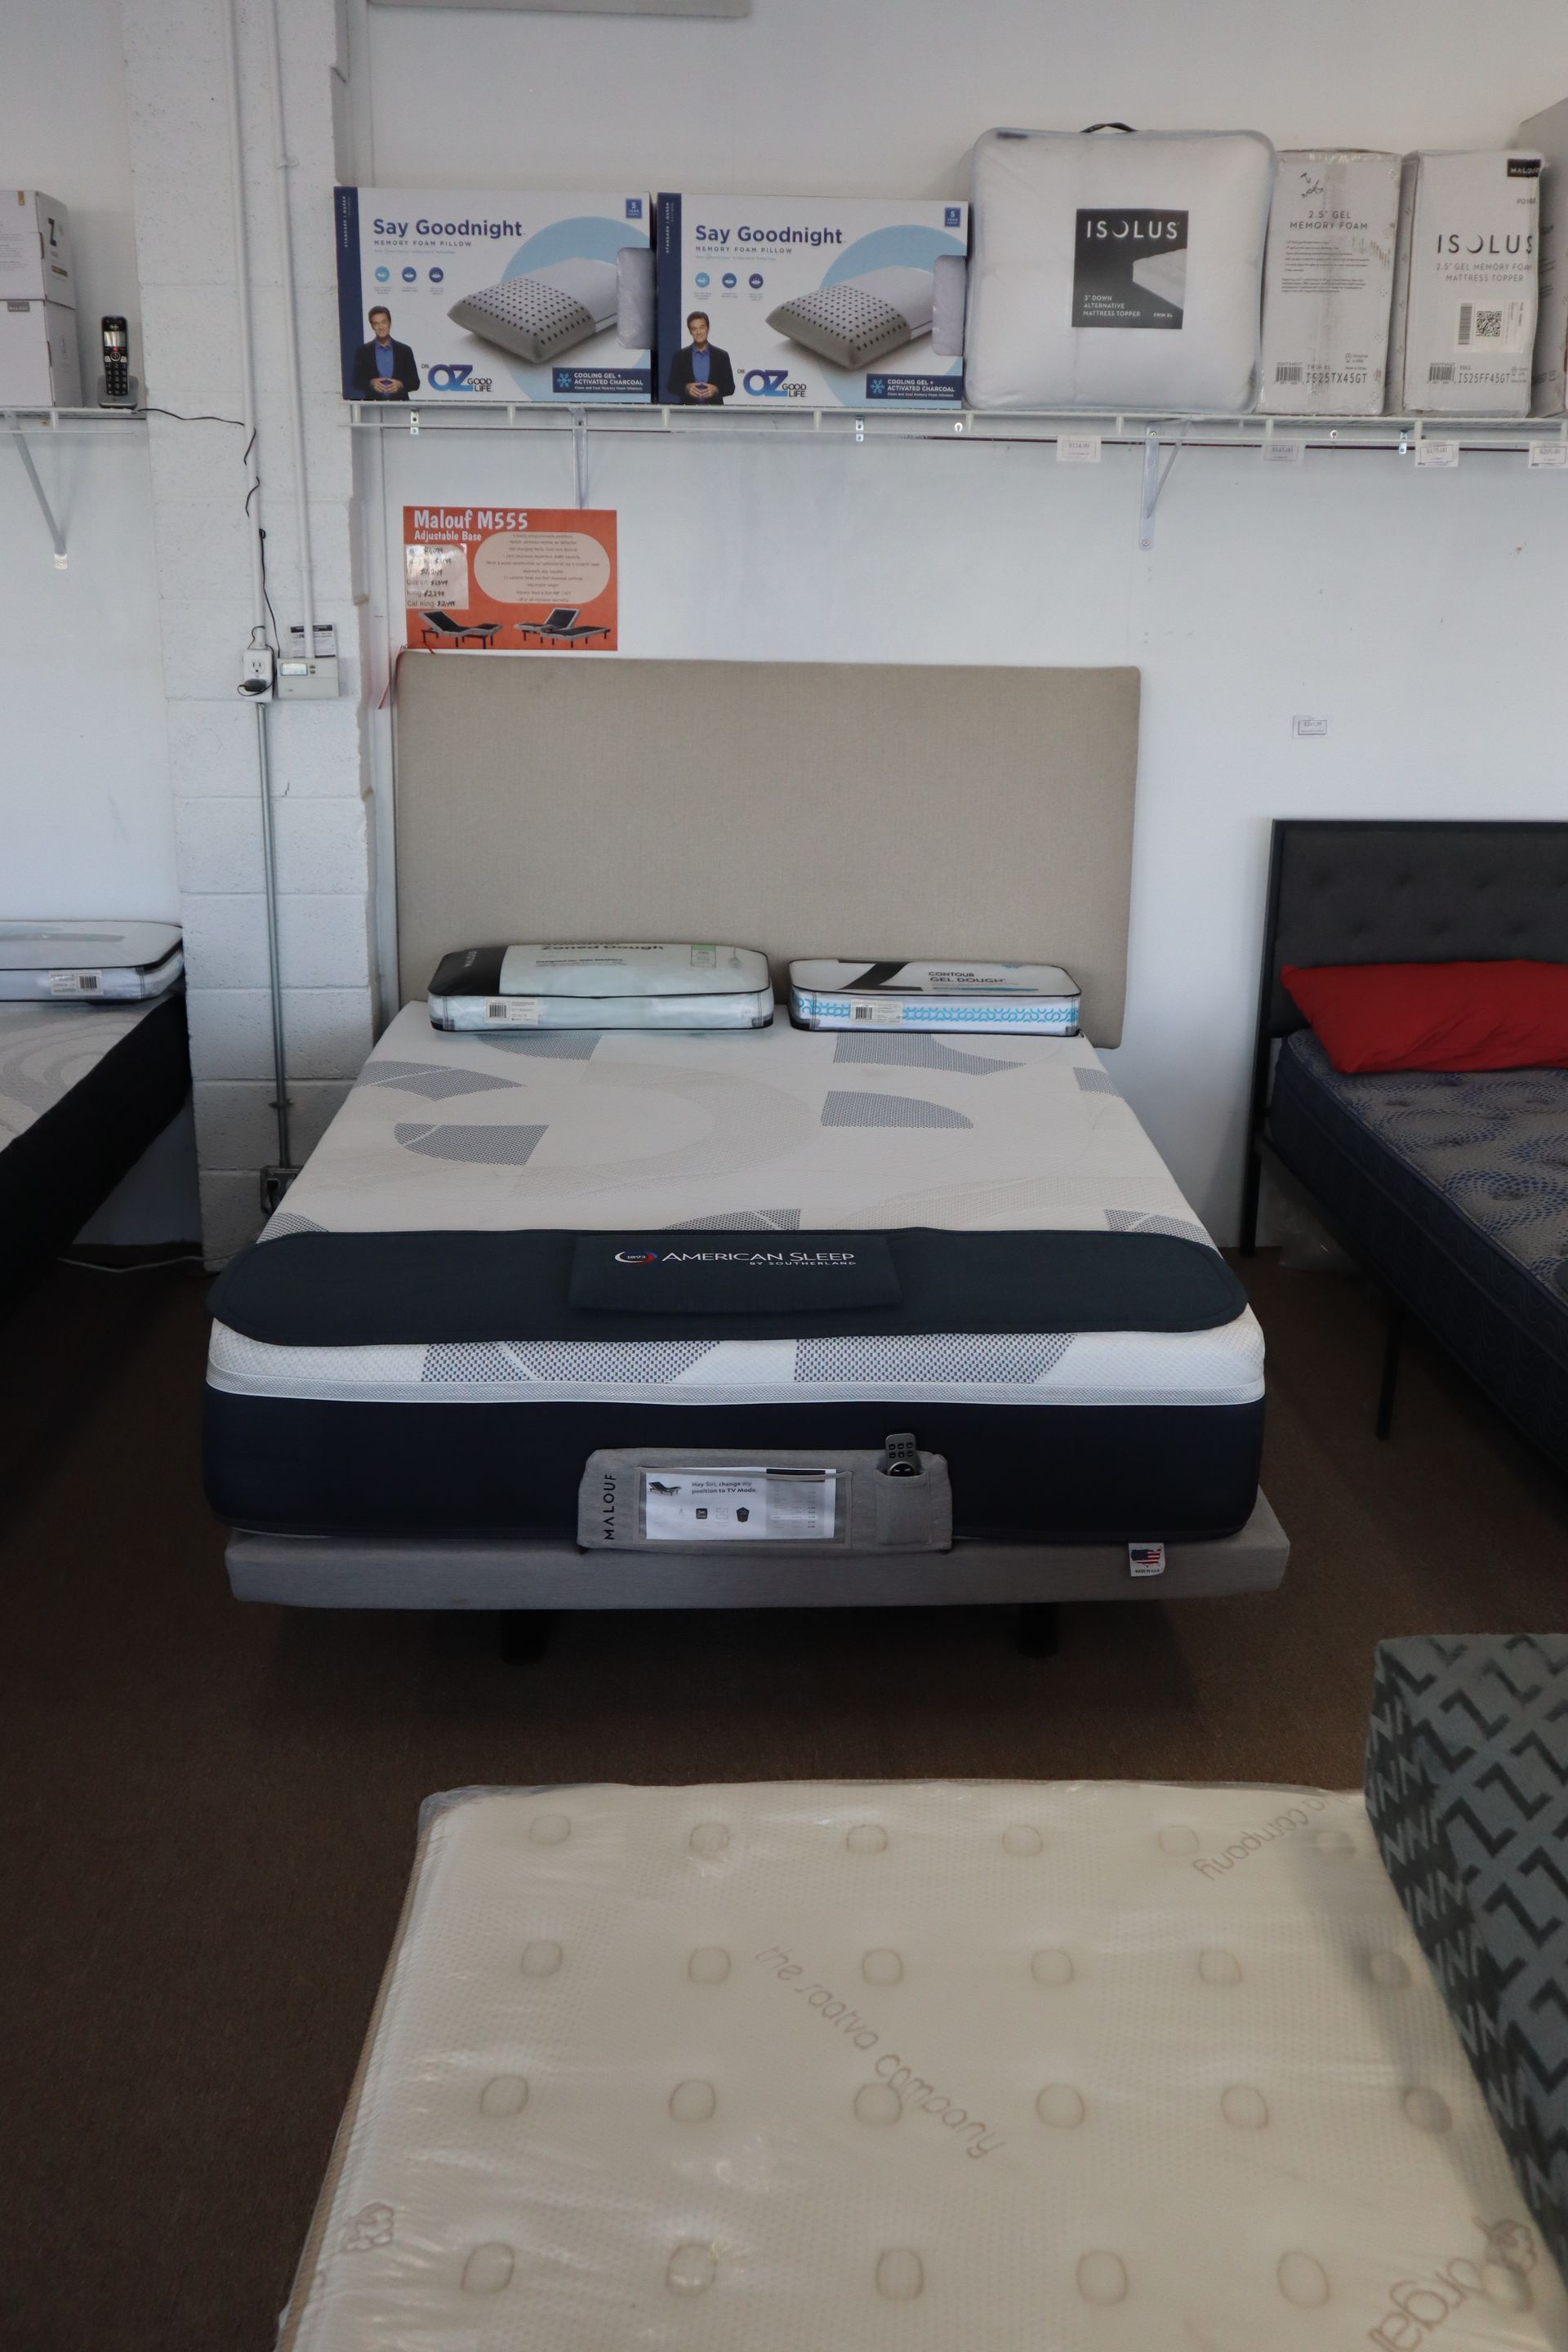 Mattress for sale at The Mattress Outlet